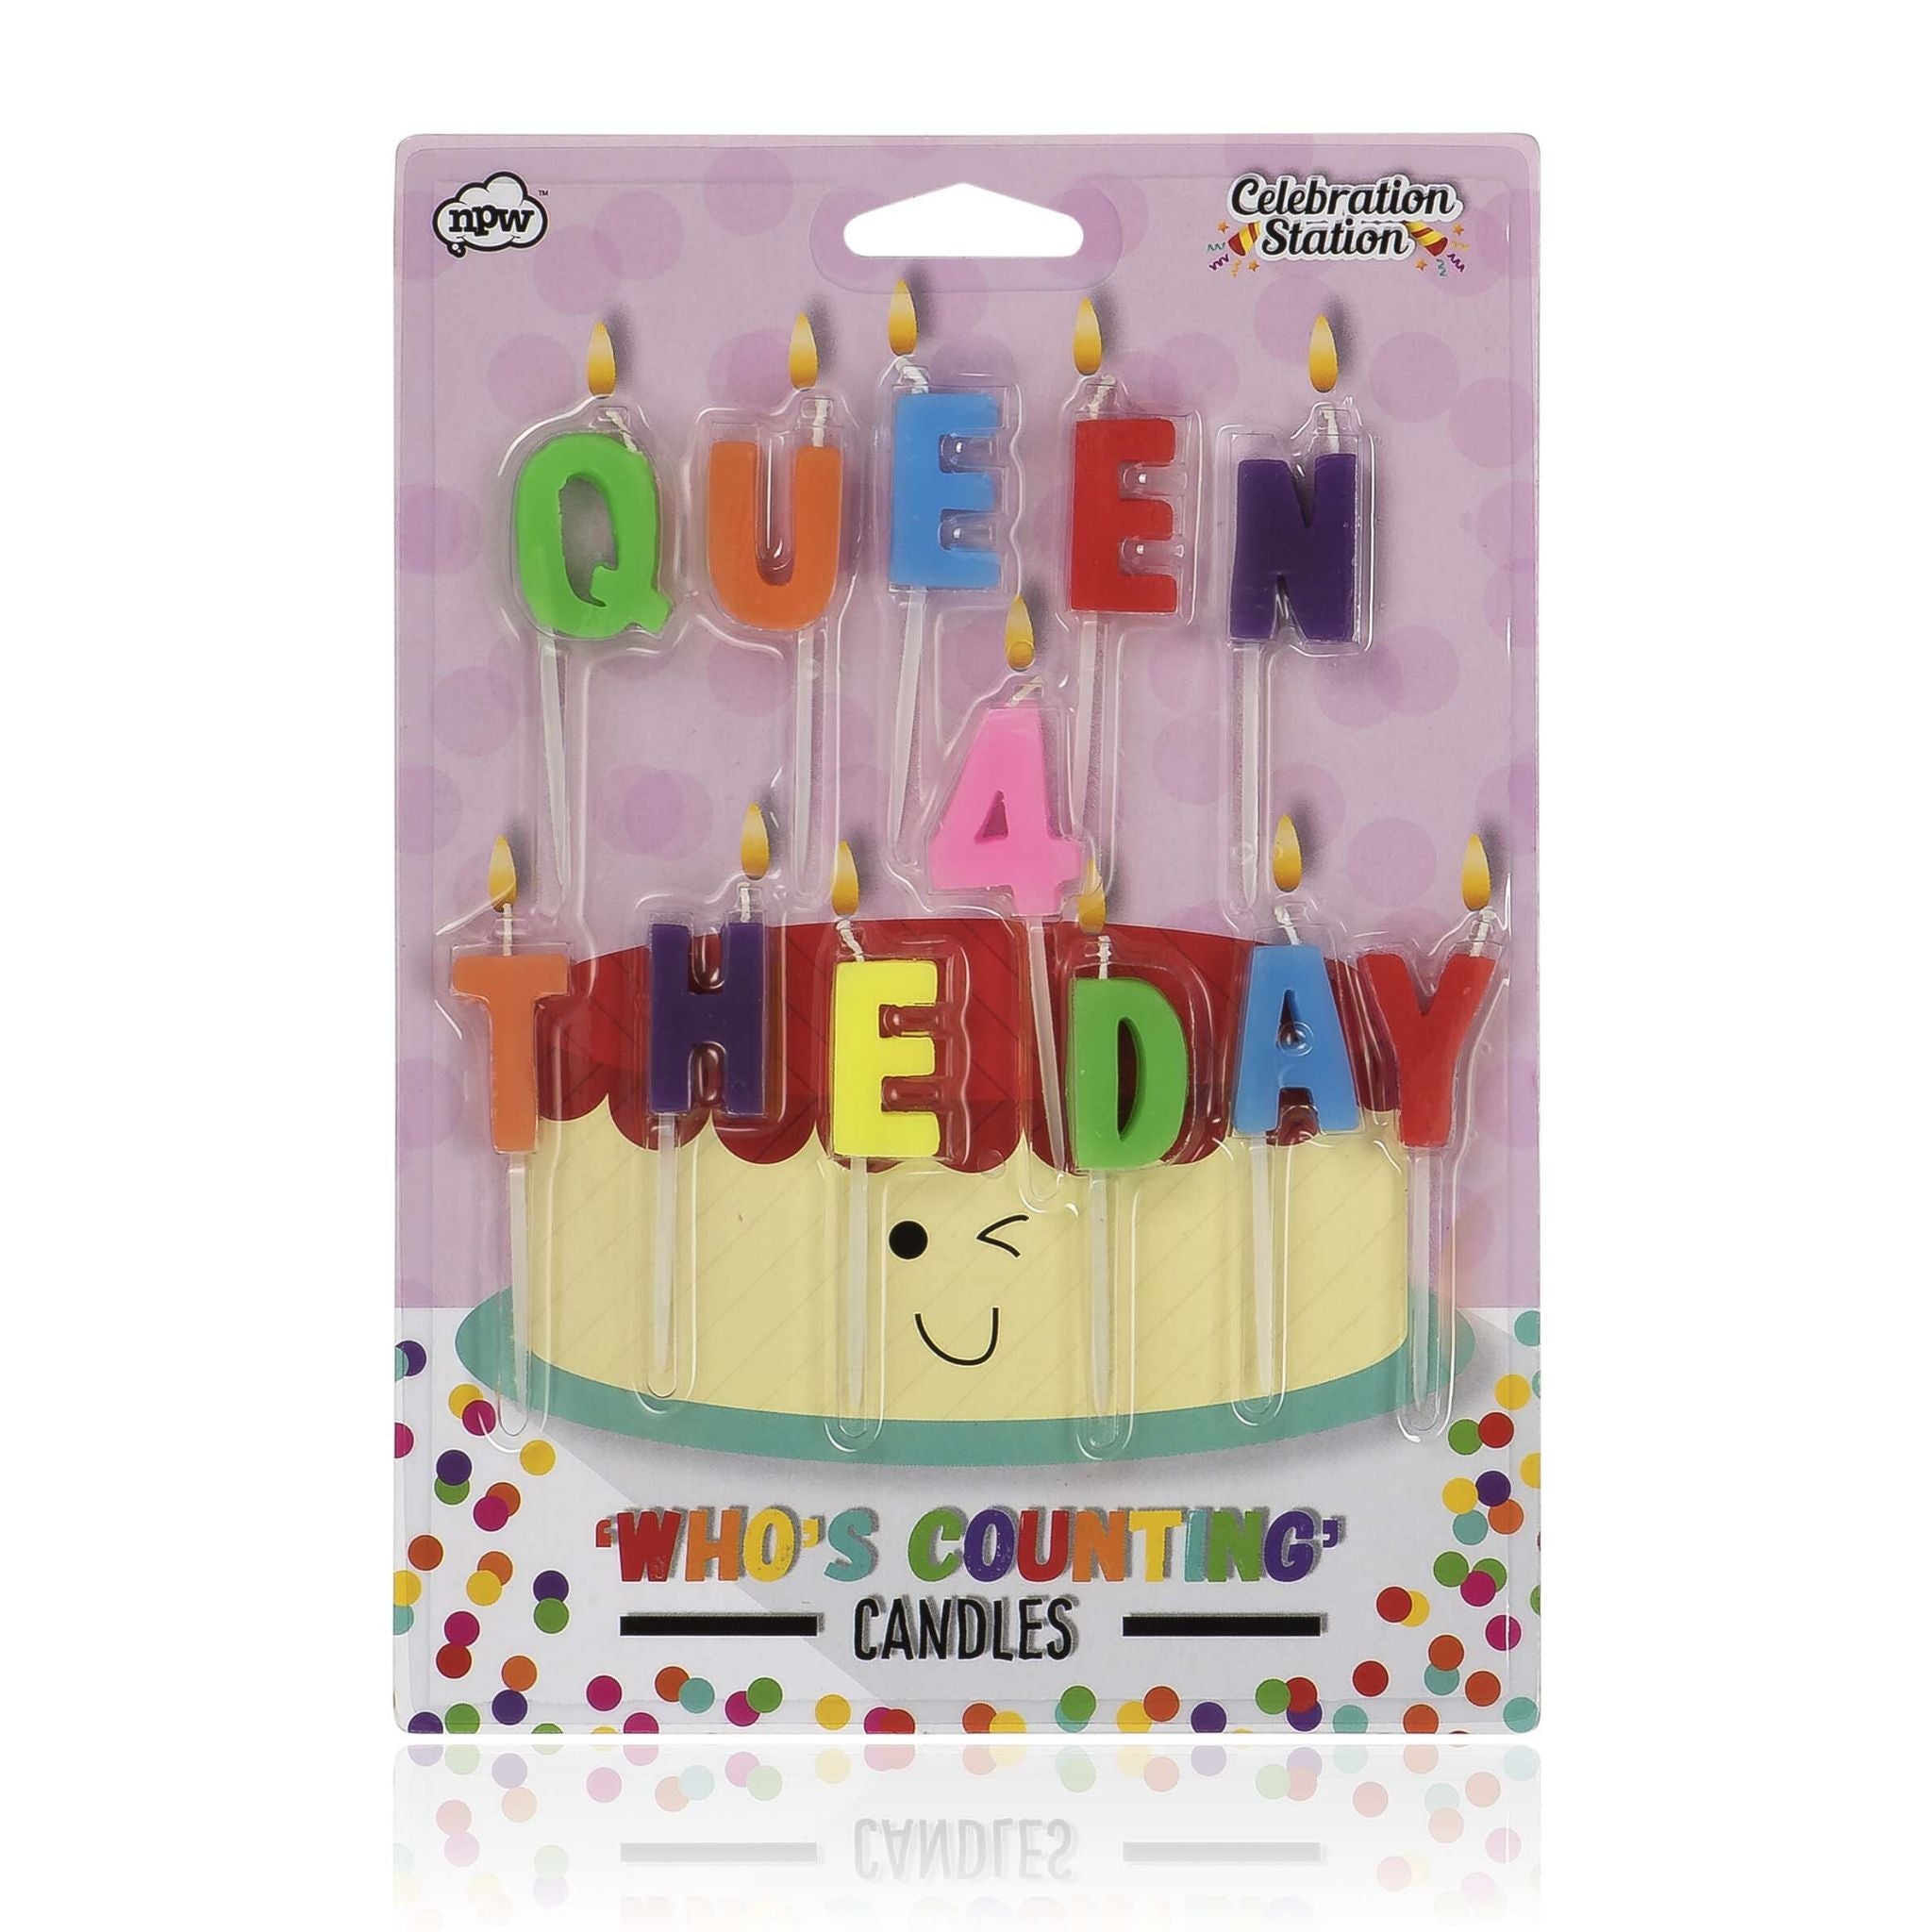 "Queen 4 the Day" Novelty Candles